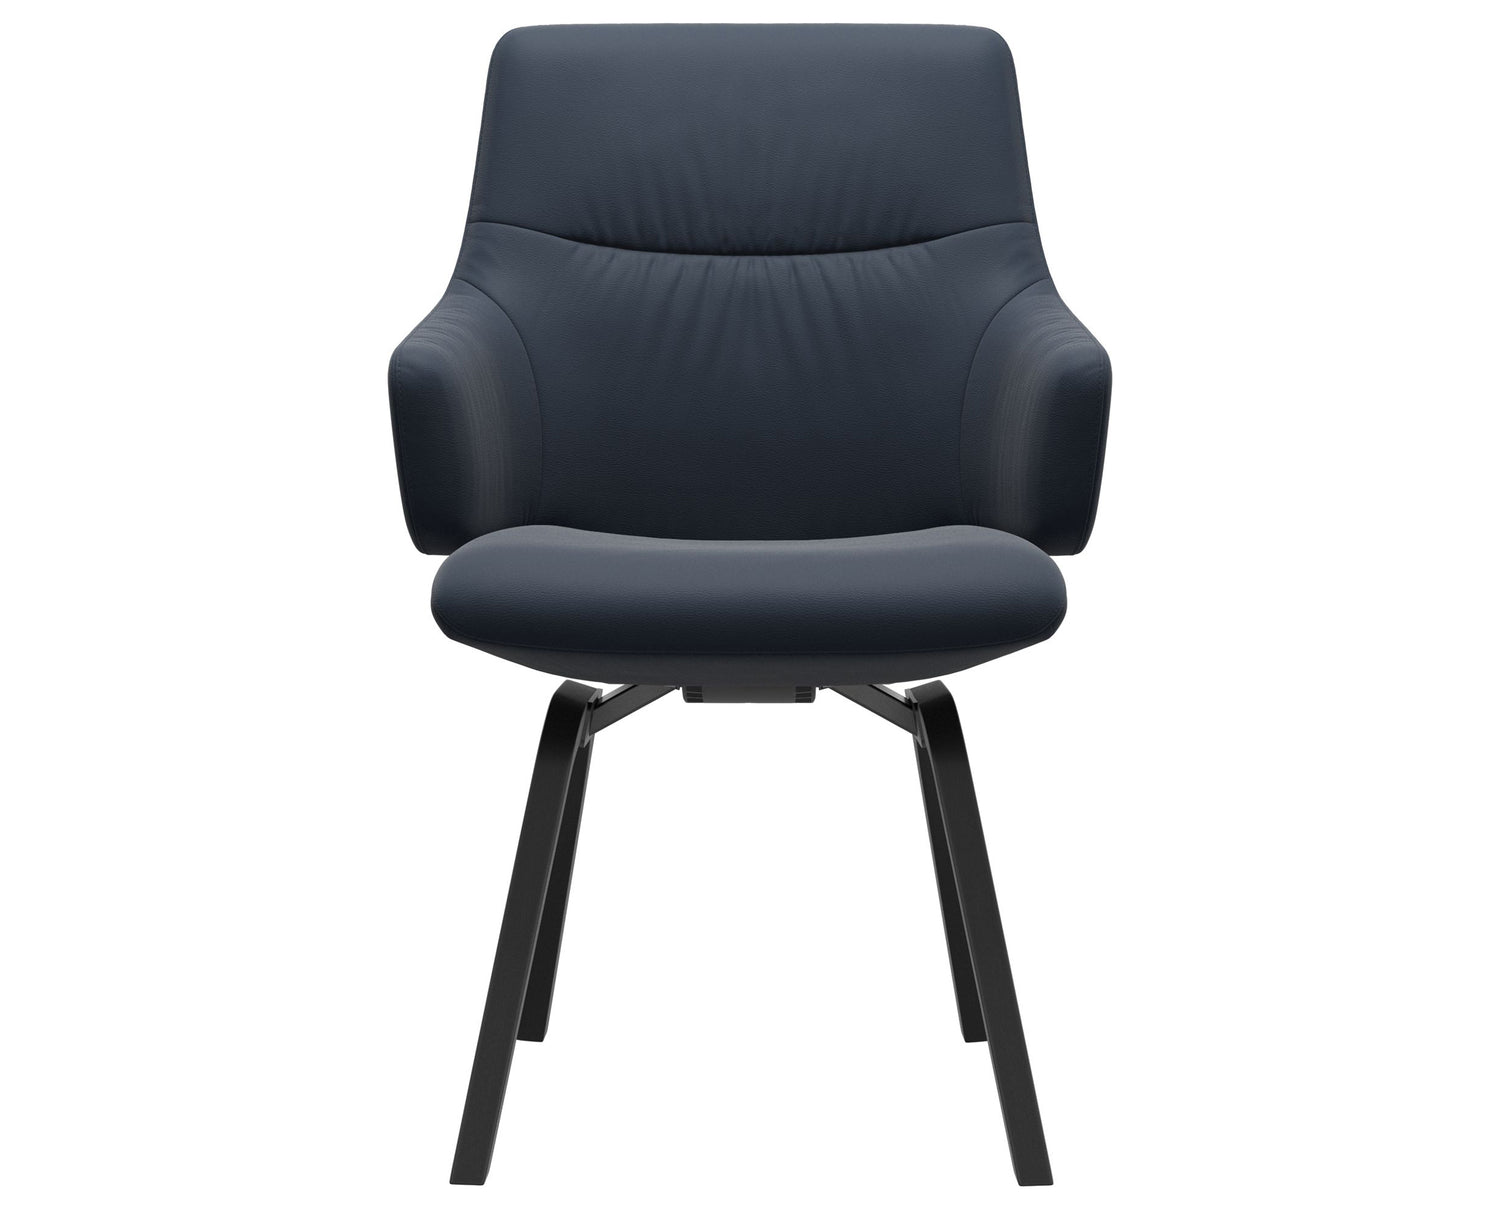 Paloma Leather Oxford Blue & Black Base | Stressless Mint Low Back D200 Dining Chair w/Arms | Valley Ridge Furniture